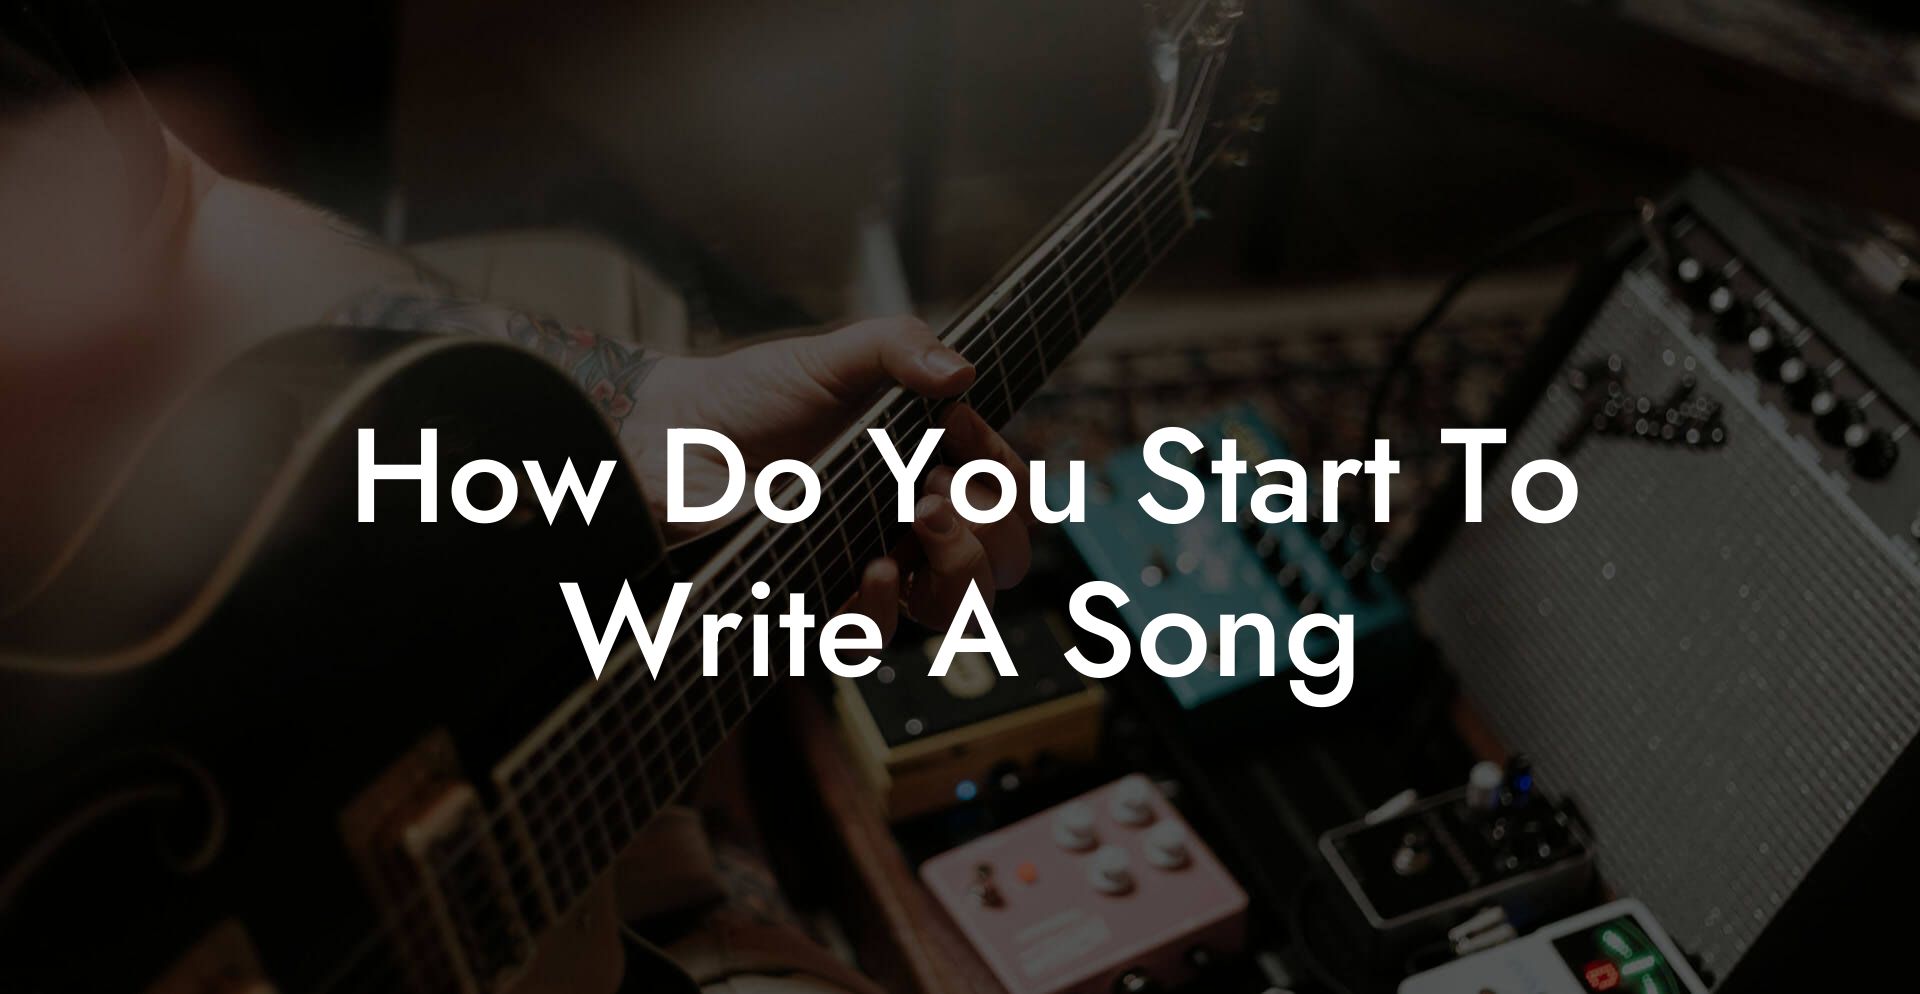 how do you start to write a song lyric assistant